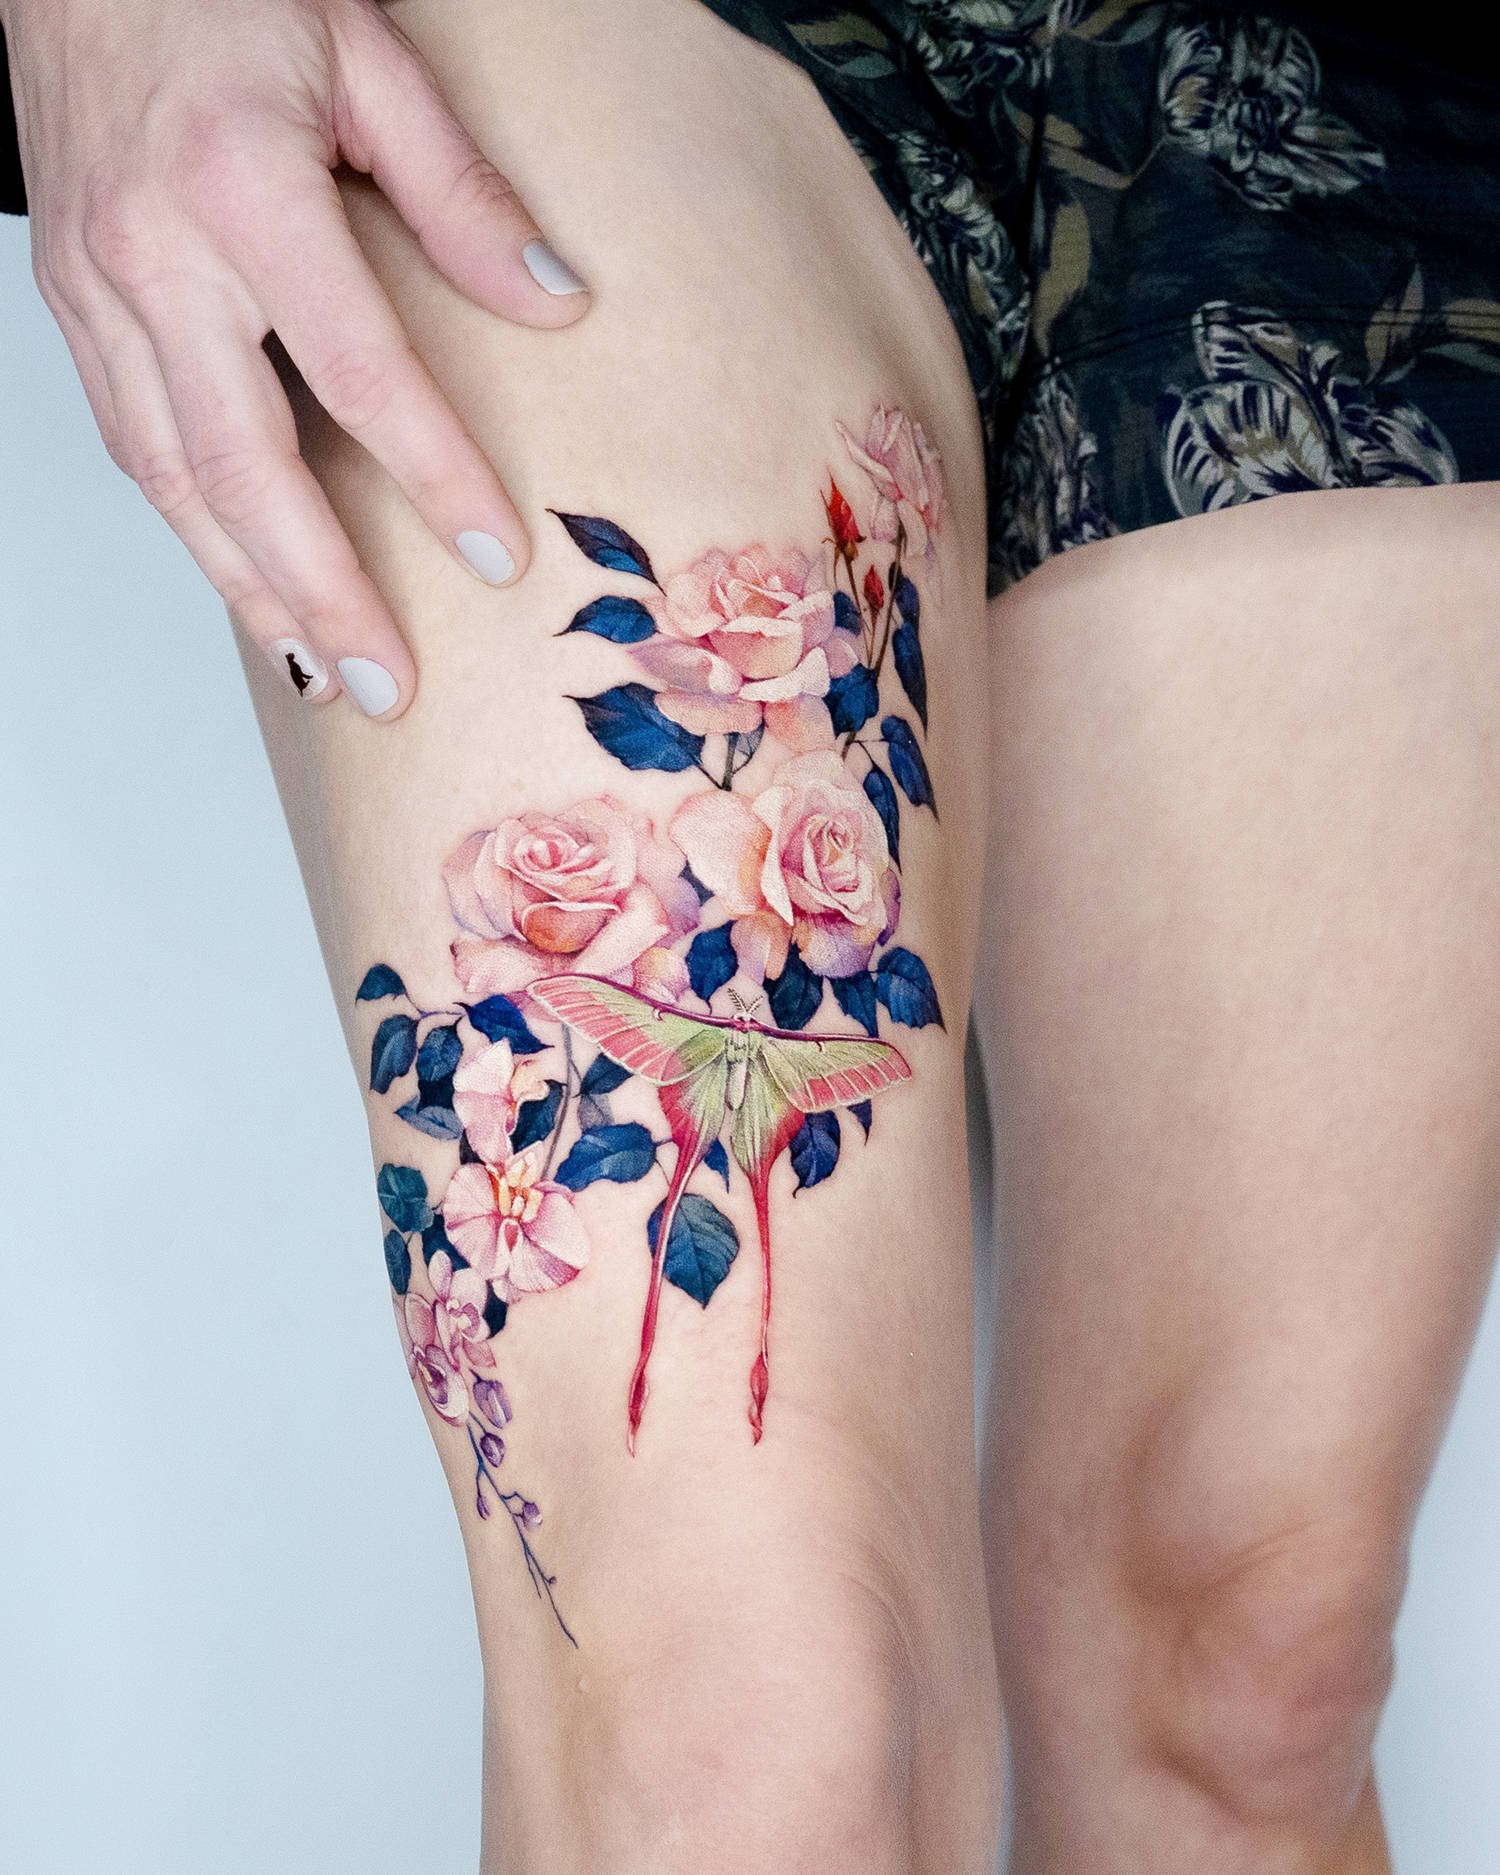 pink roses with wing-insect tattoo on thigh